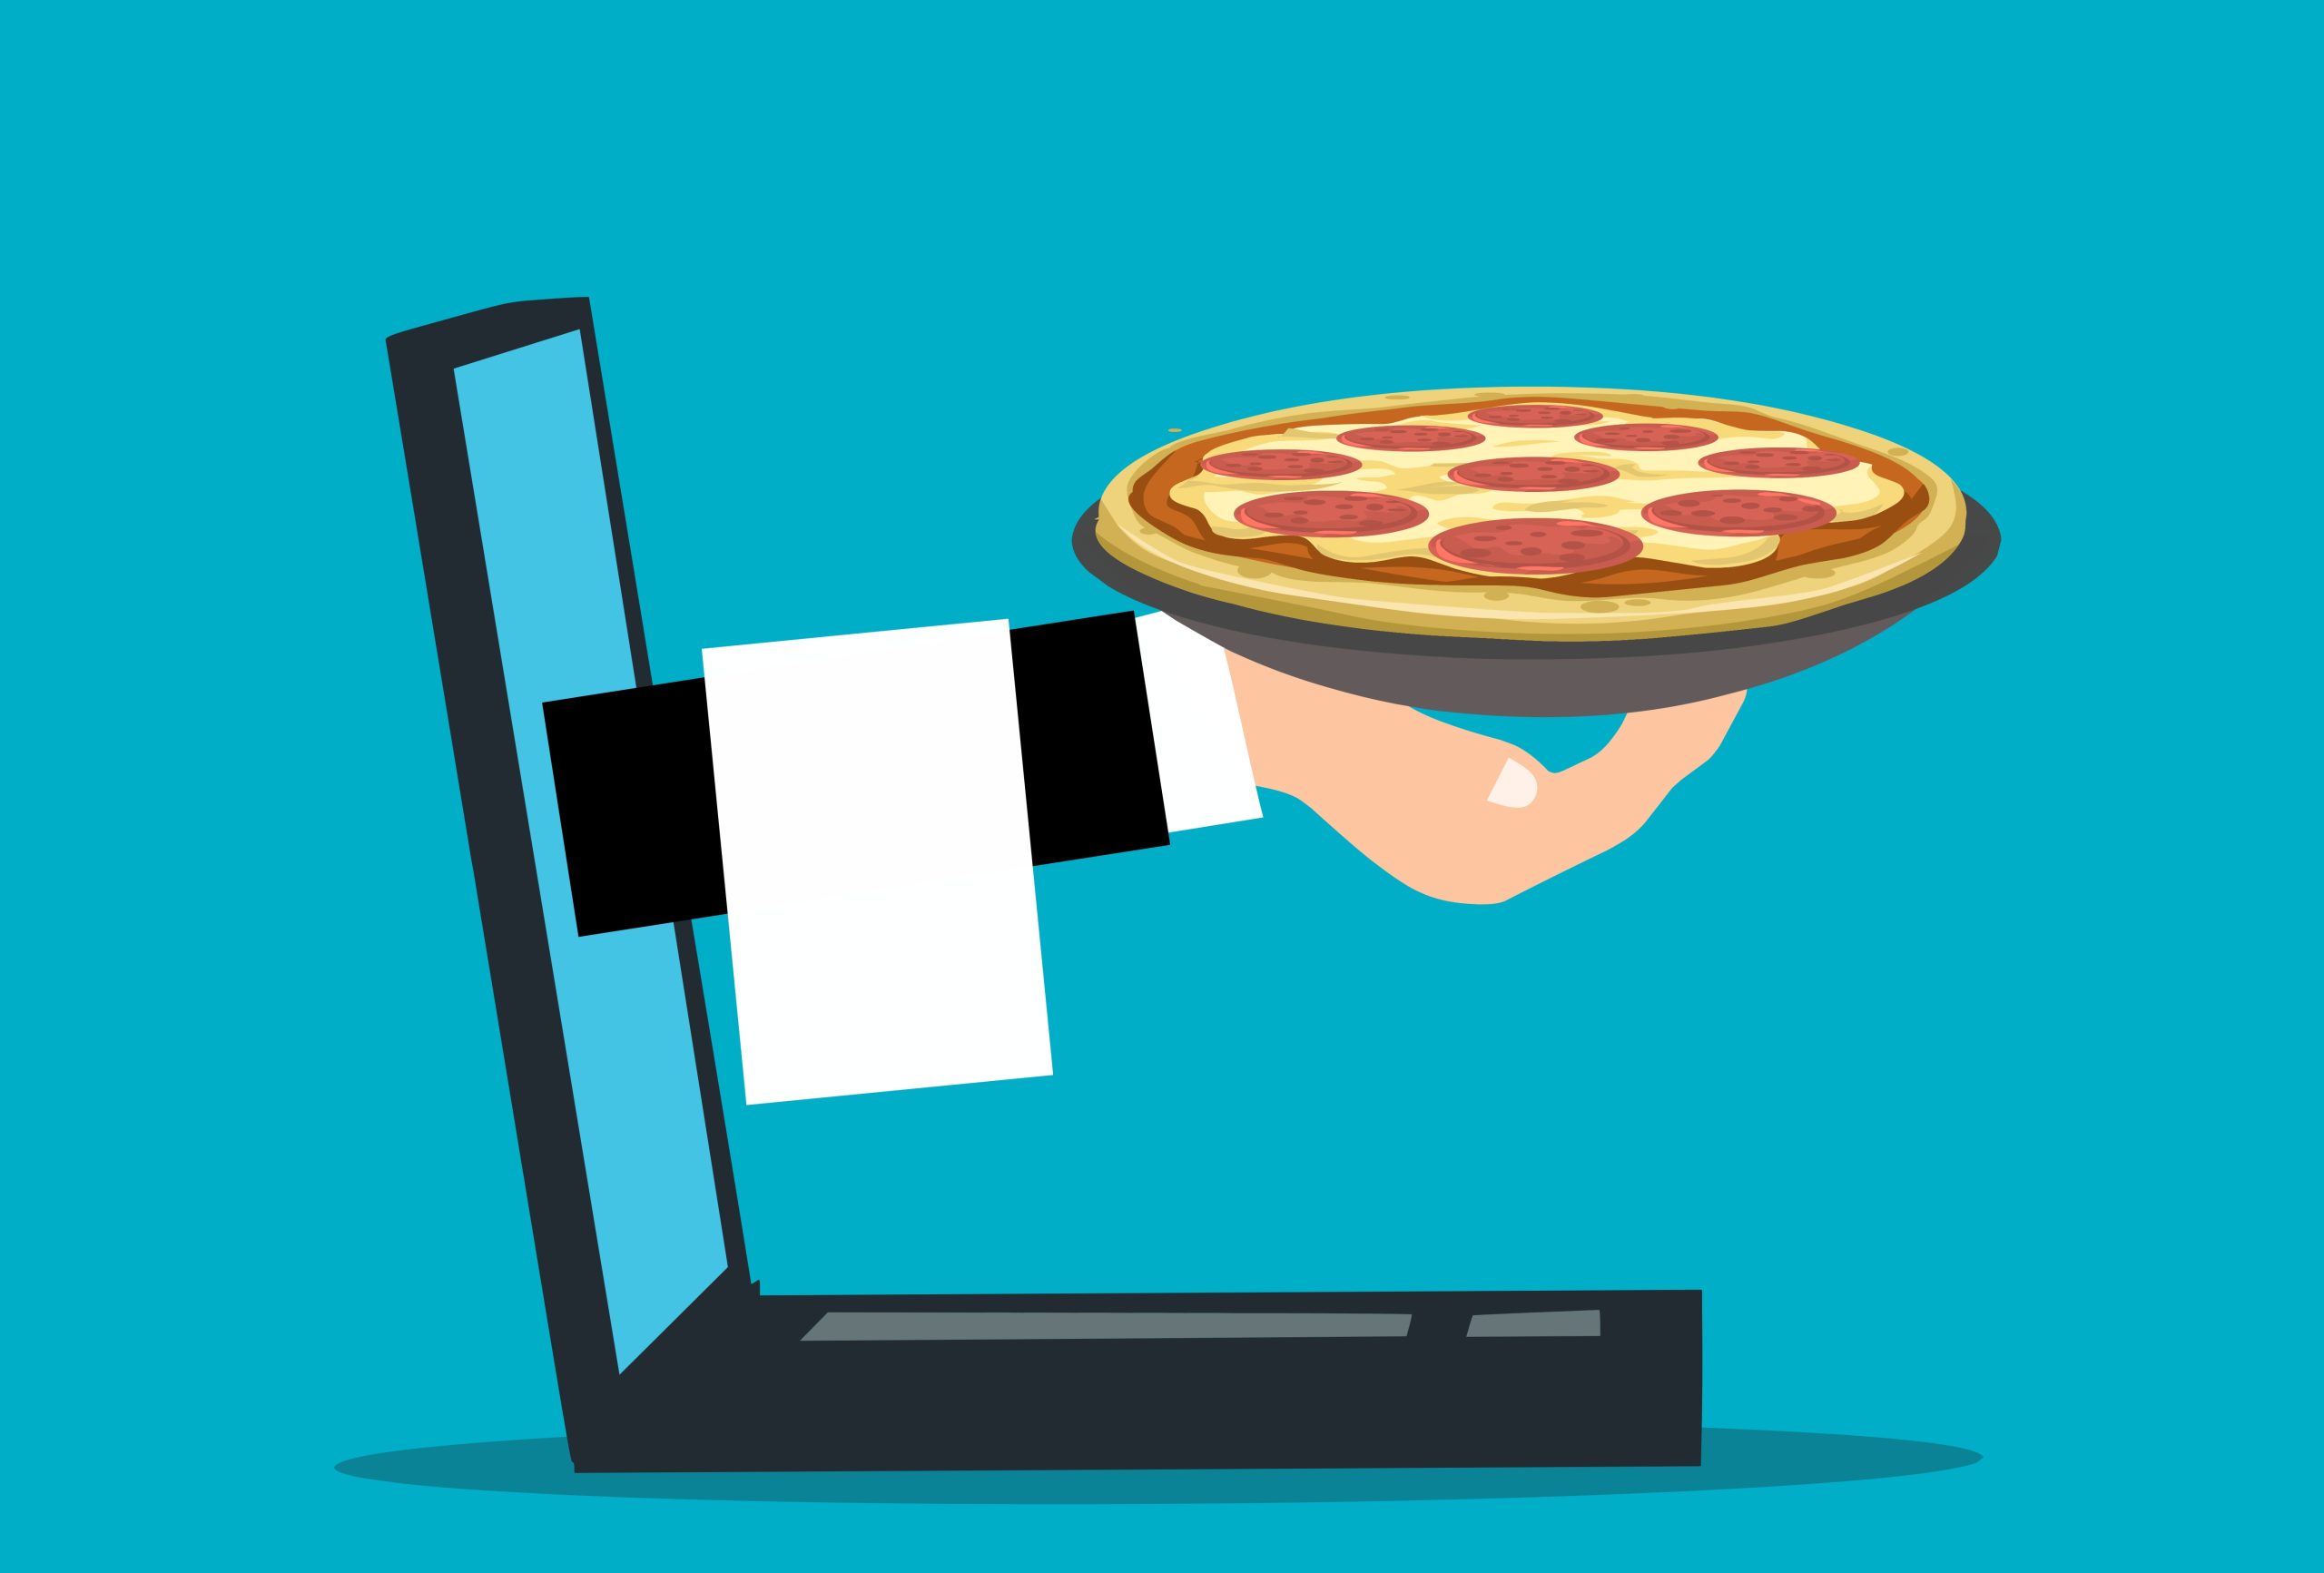 A graphic of a hand holding a pizza extending out of a laptop screen.